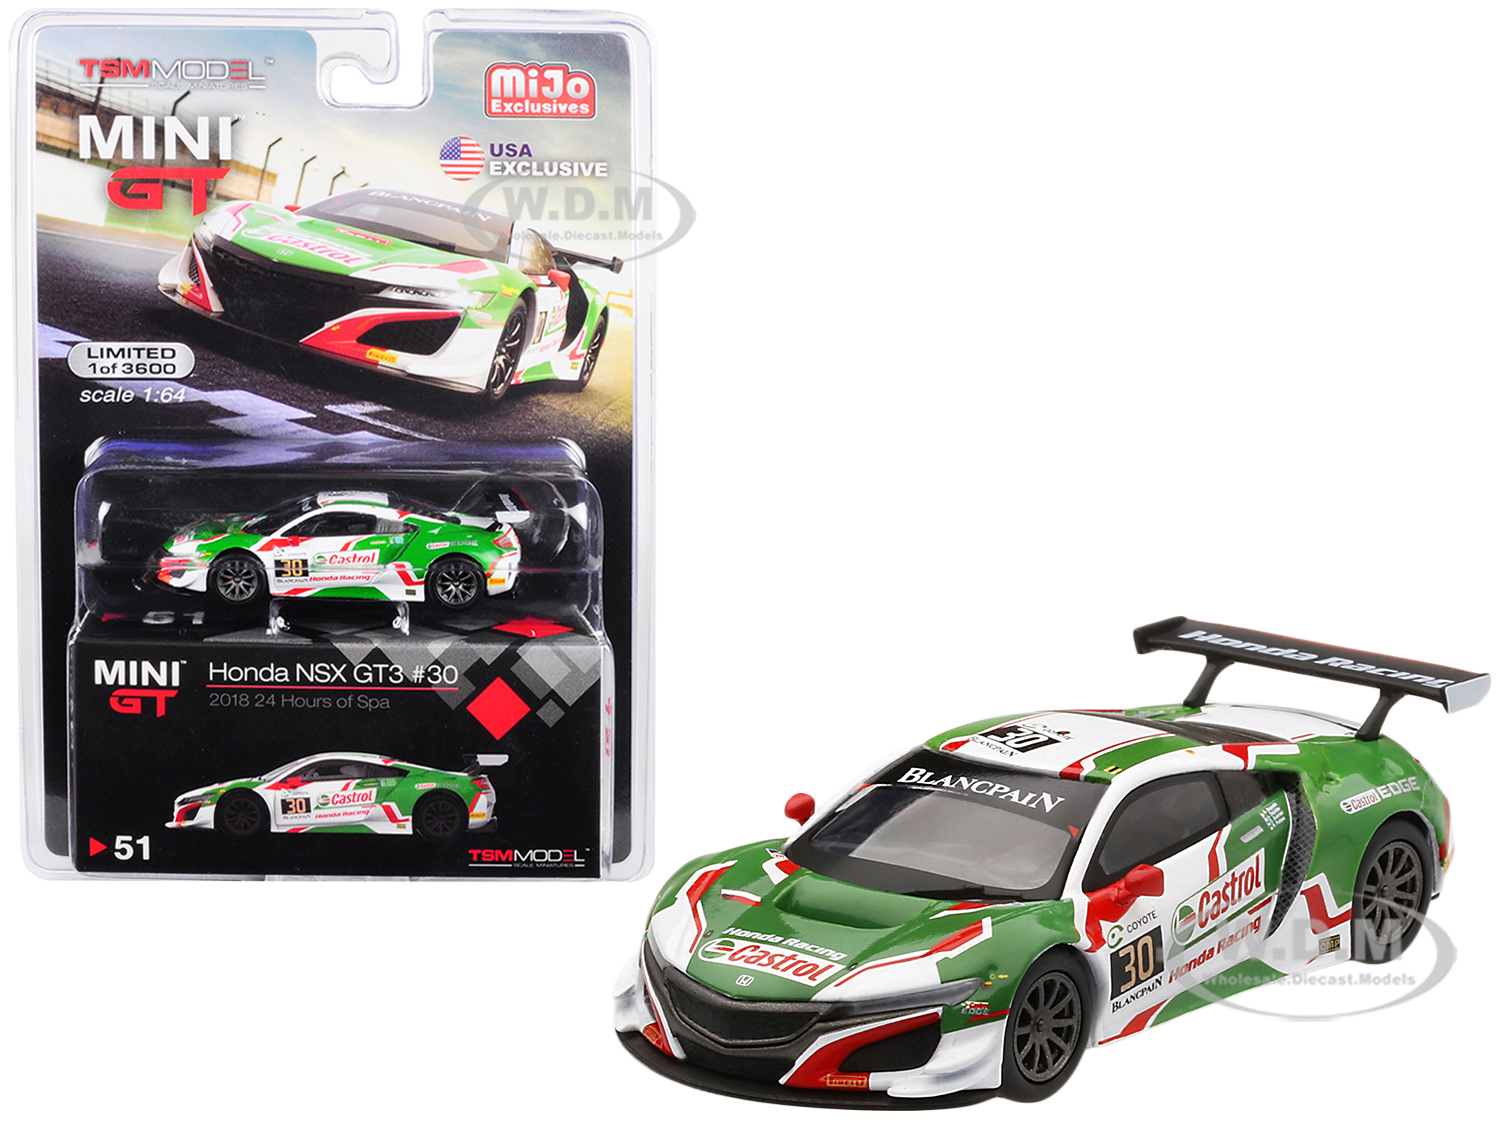 Honda NSX GT3 30 "Castrol" 24 Hours of Spa (2018) Limited Edition to 3600 pieces Worldwide 1/64 Diecast Model Car by True Scale Miniatures